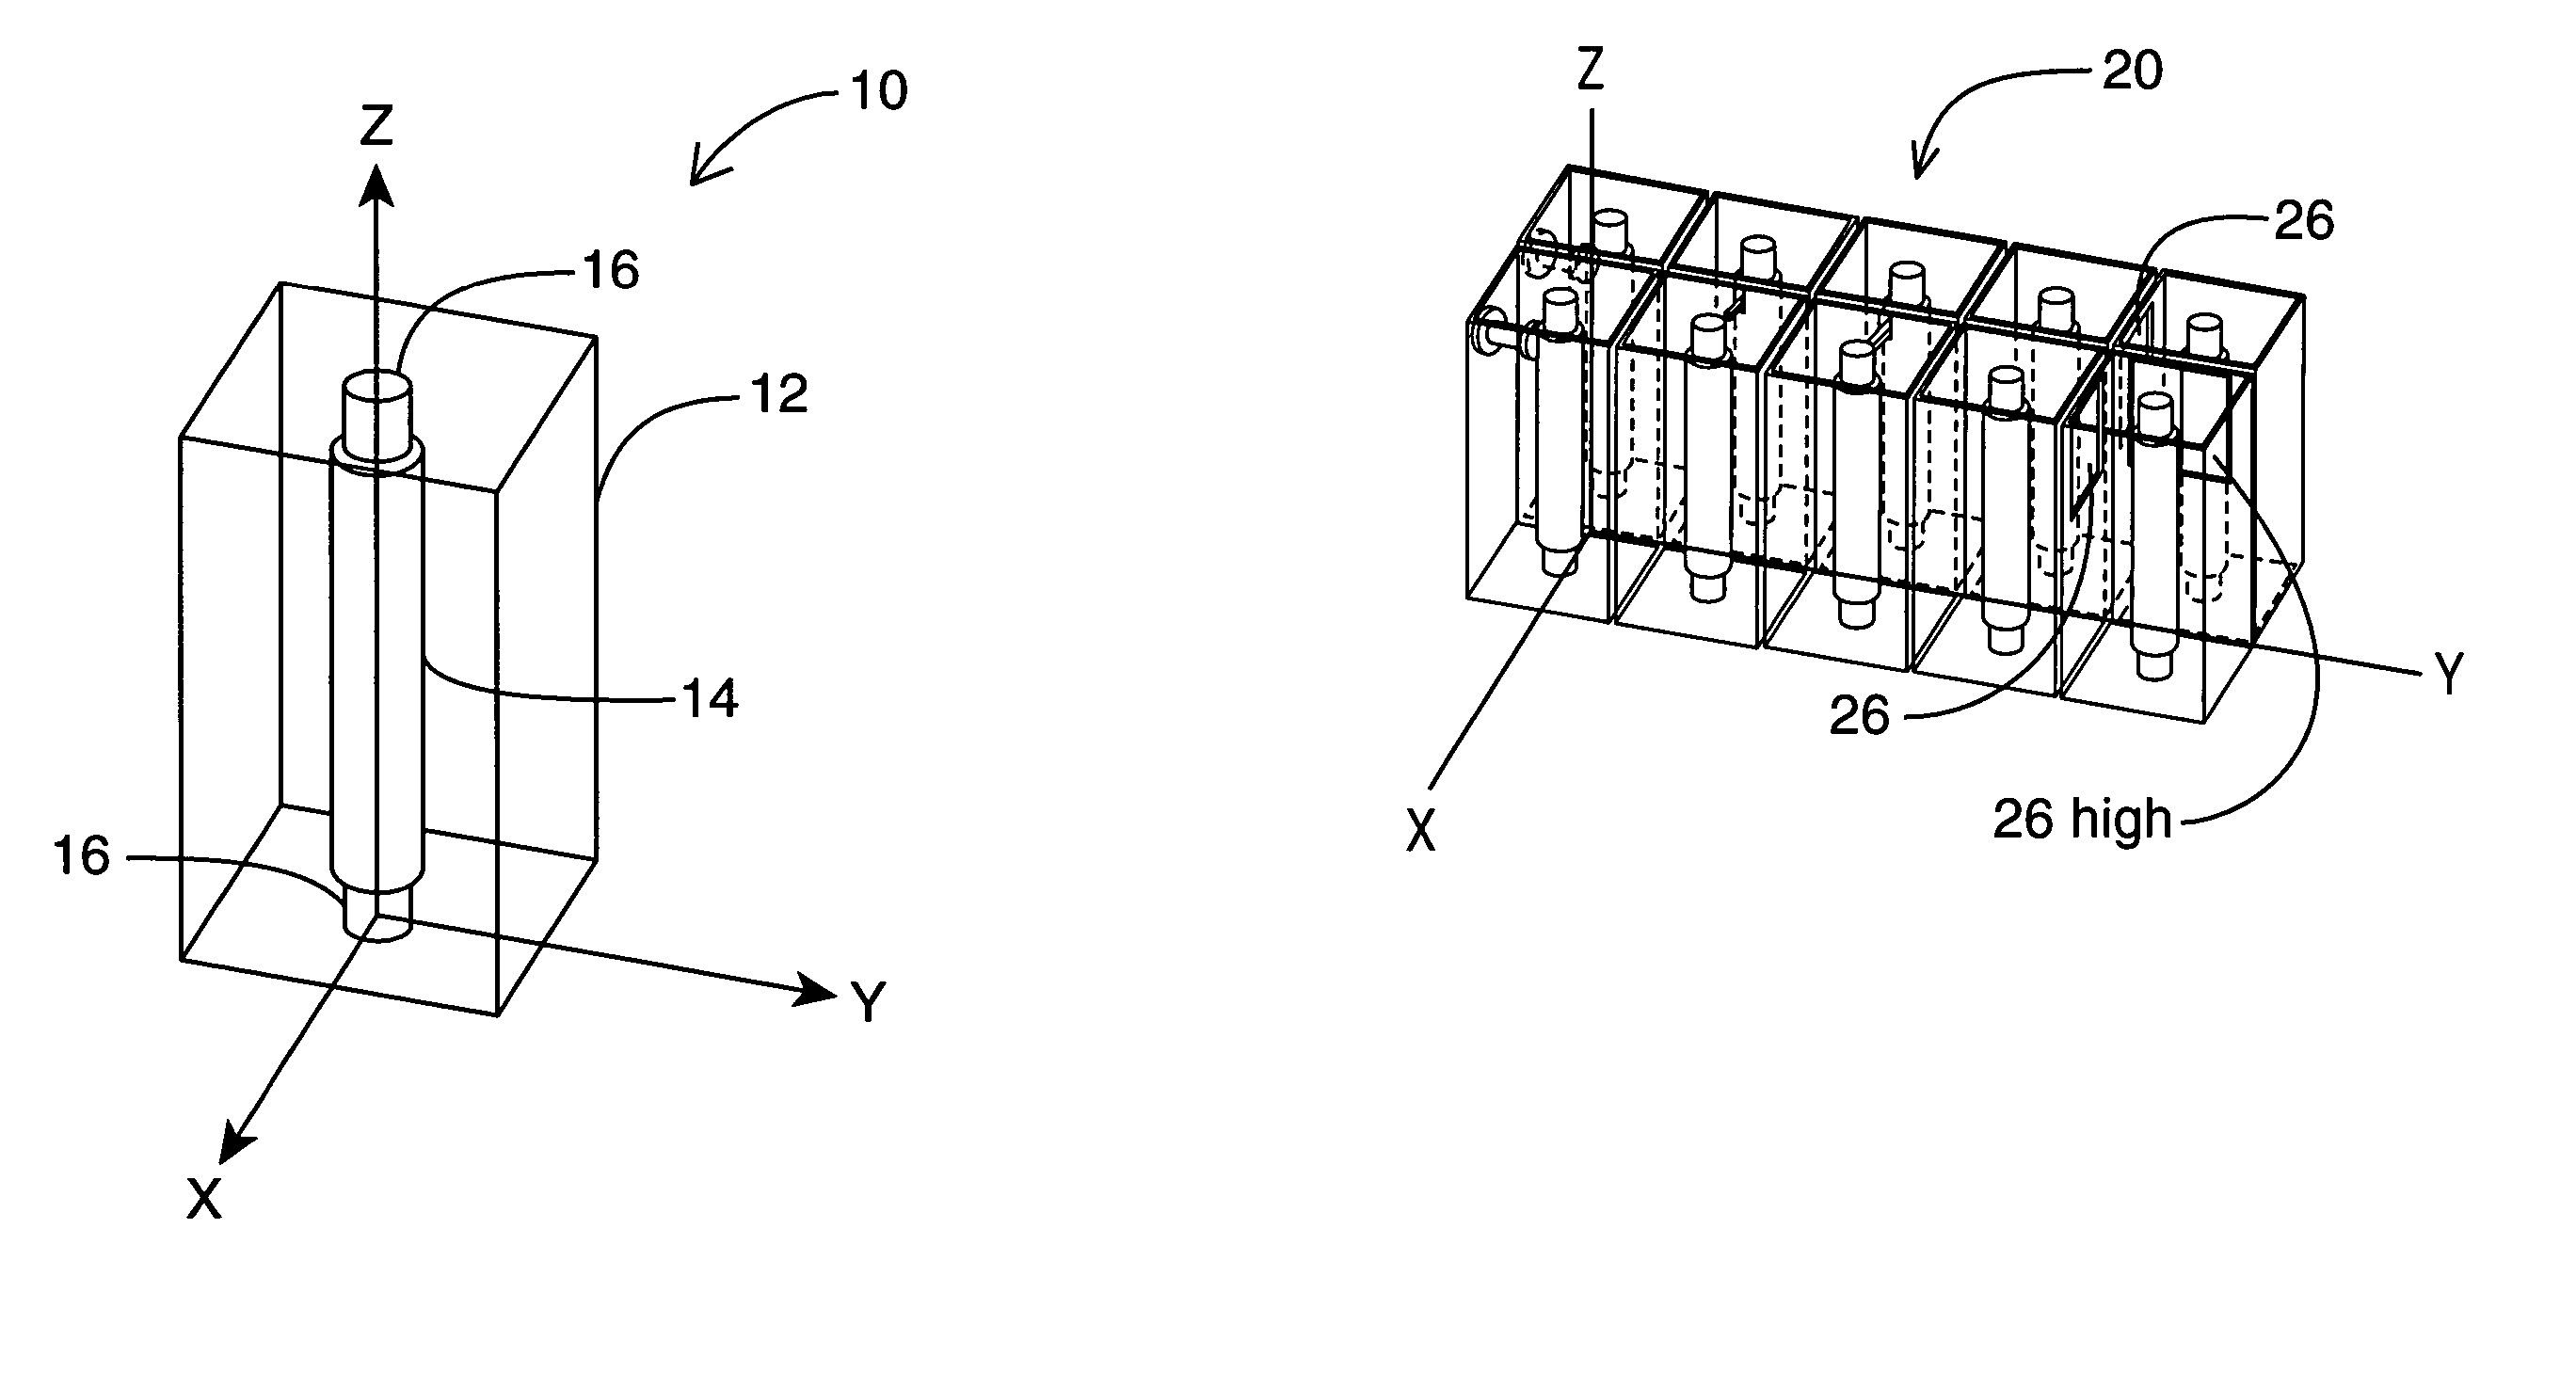 Microwave resonator and filter assembly